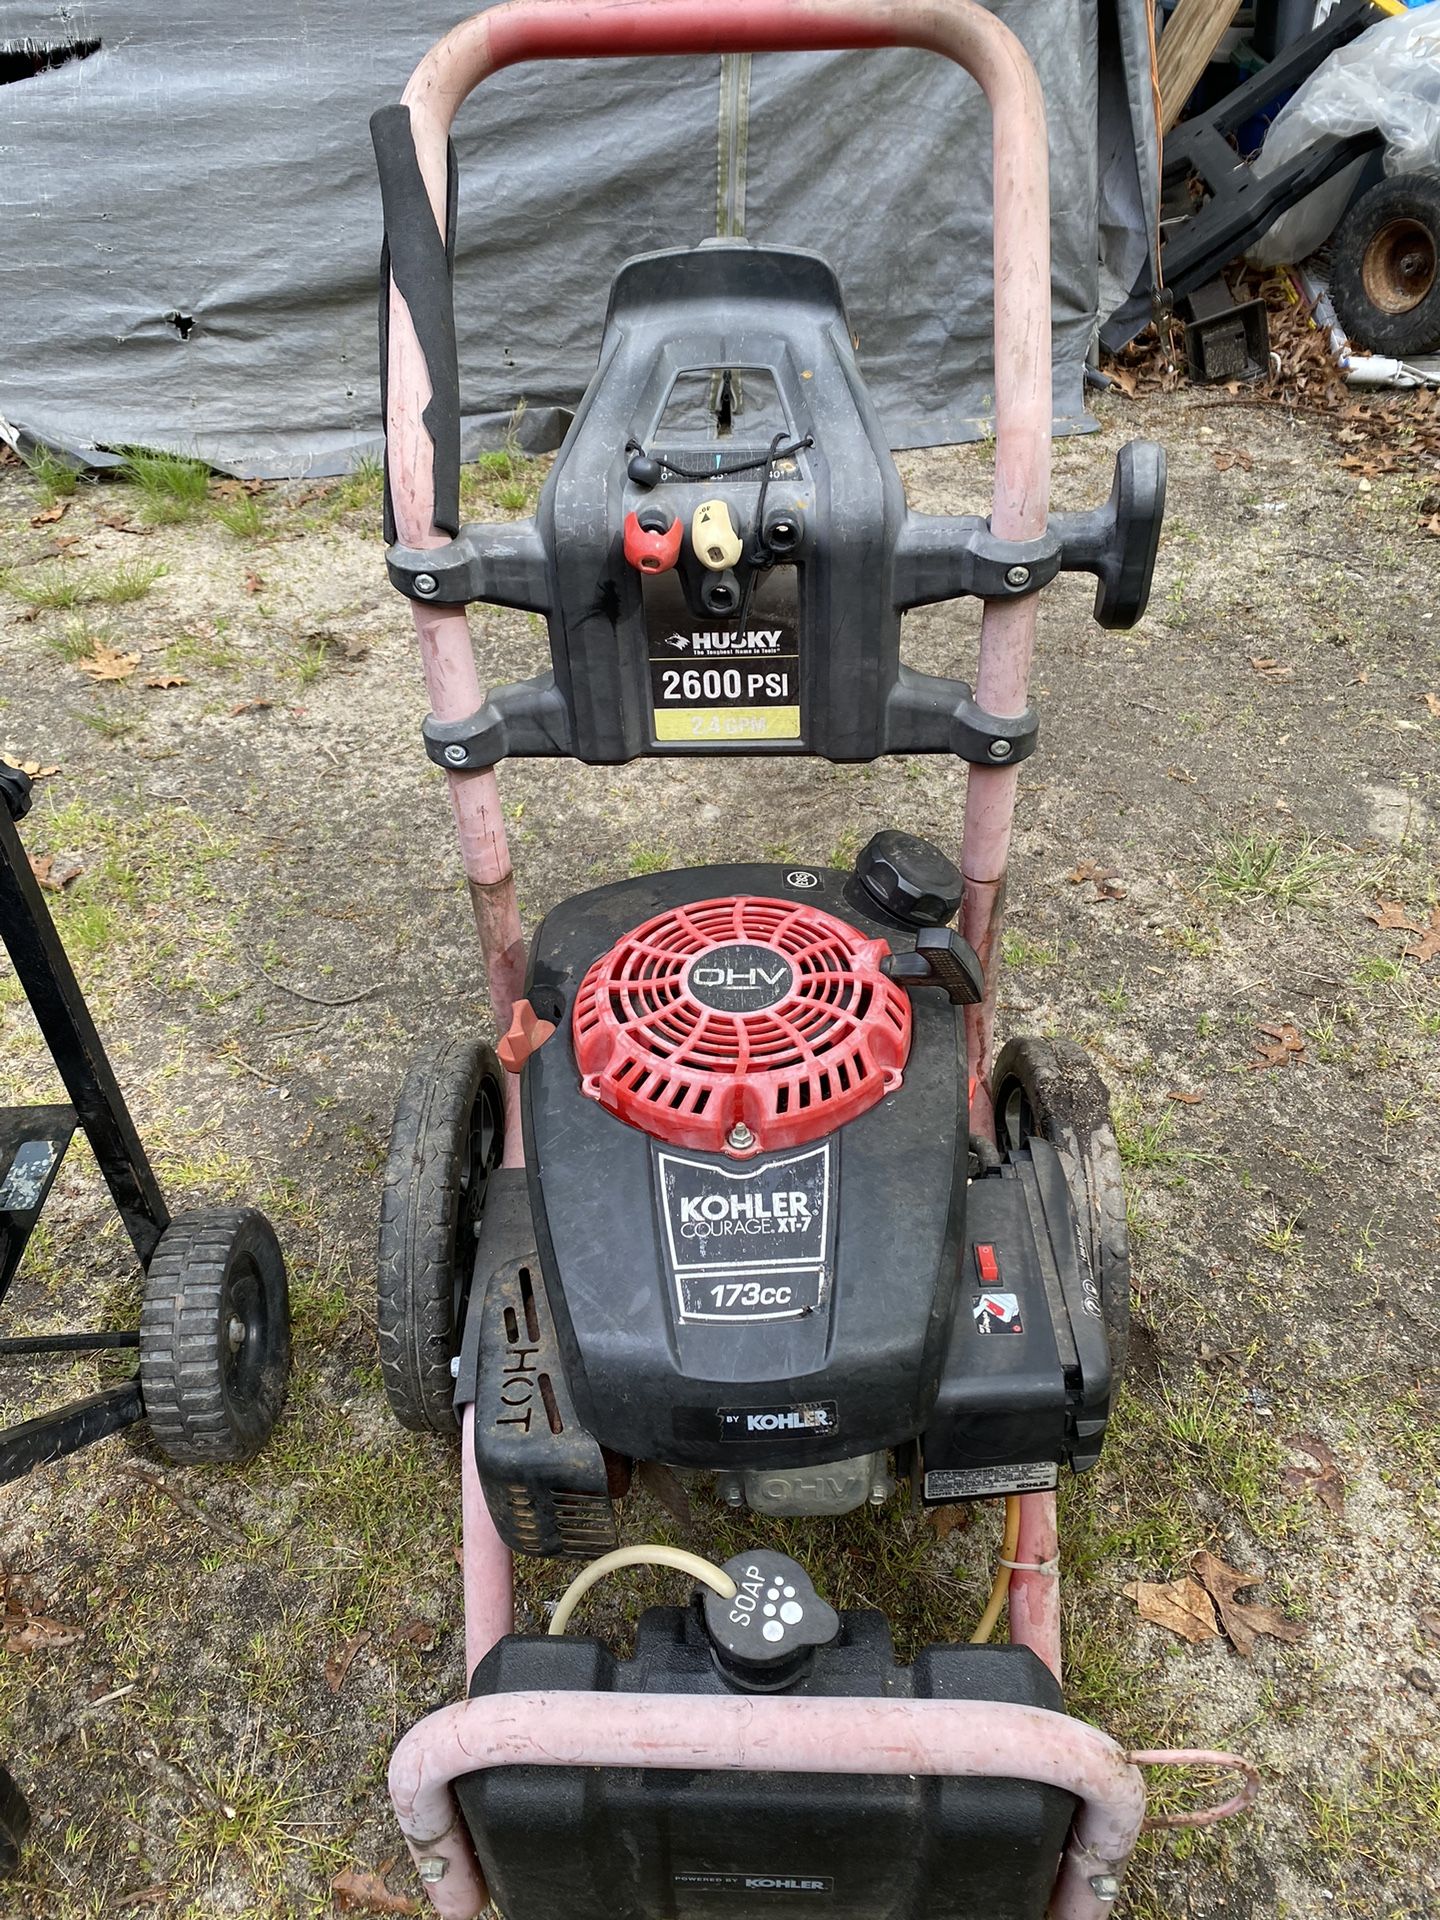 Pressure Power Washers. Both For $50…..